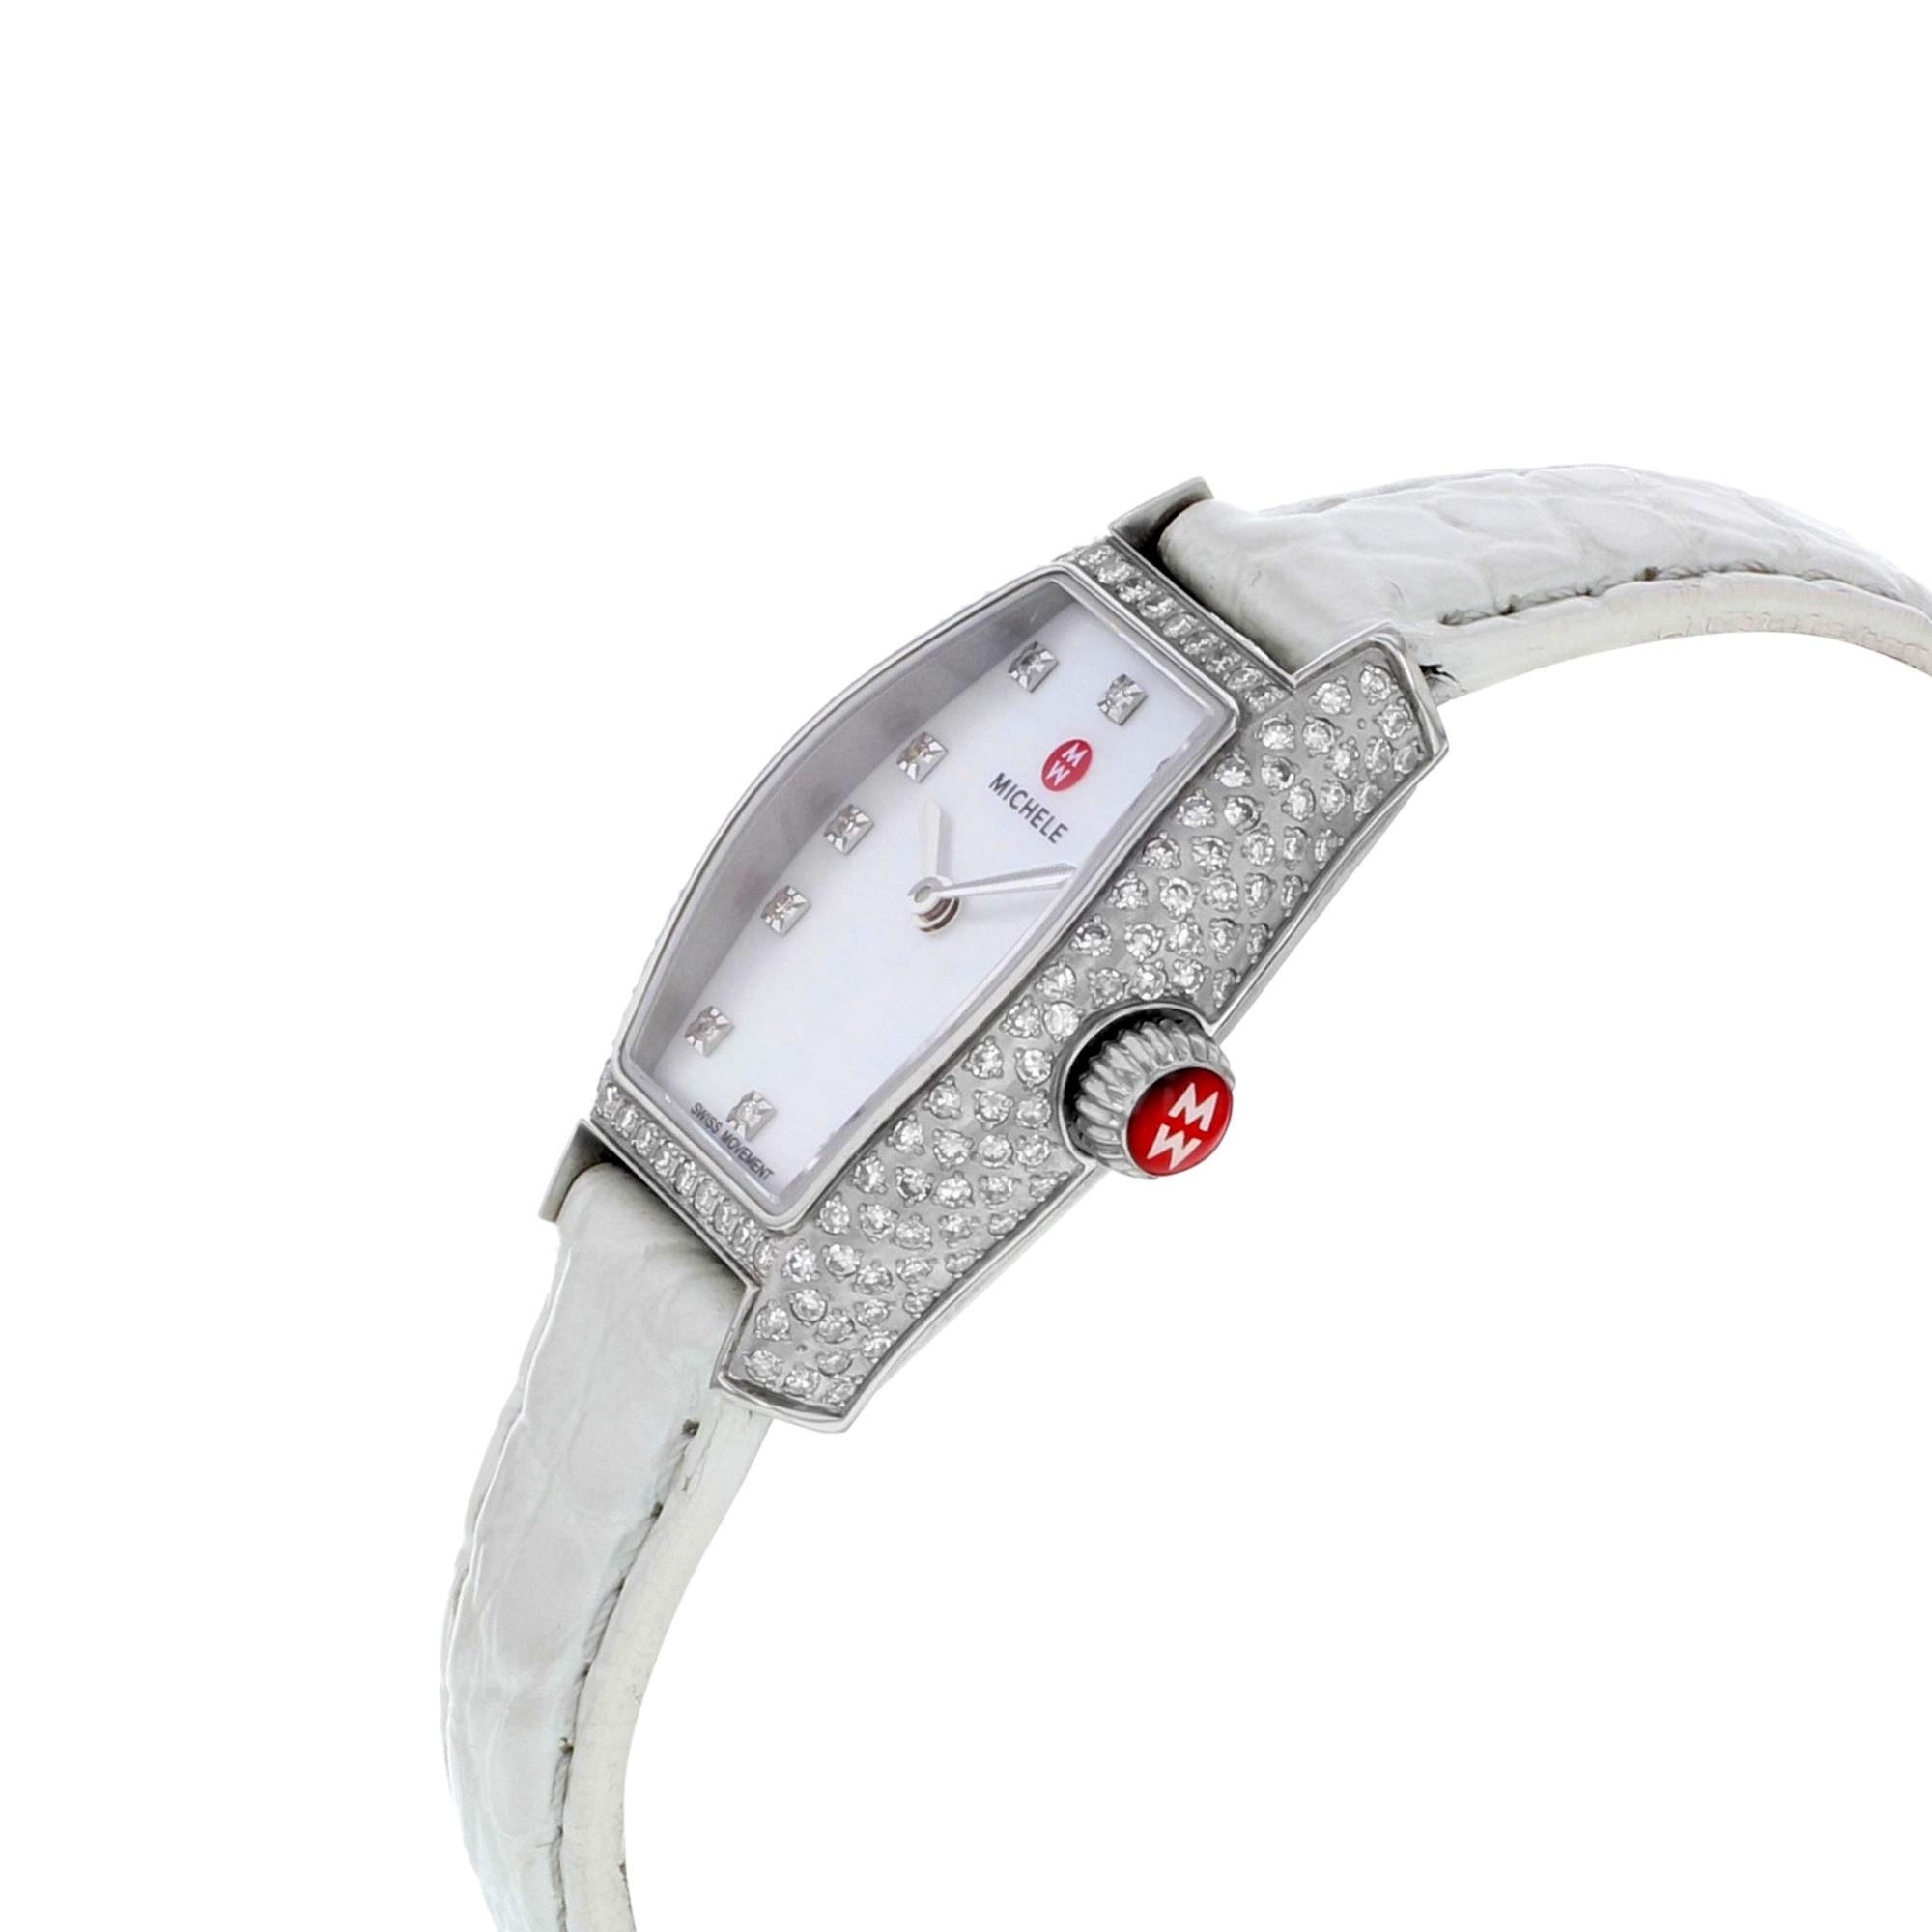 This display model Michele Urban MWW08A000223 is a beautiful Ladies timepiece that is powered by a quartz movement which is cased in a stainless steel case. It has a tonneau shape face, diamonds dial and has hand diamonds style markers. It is